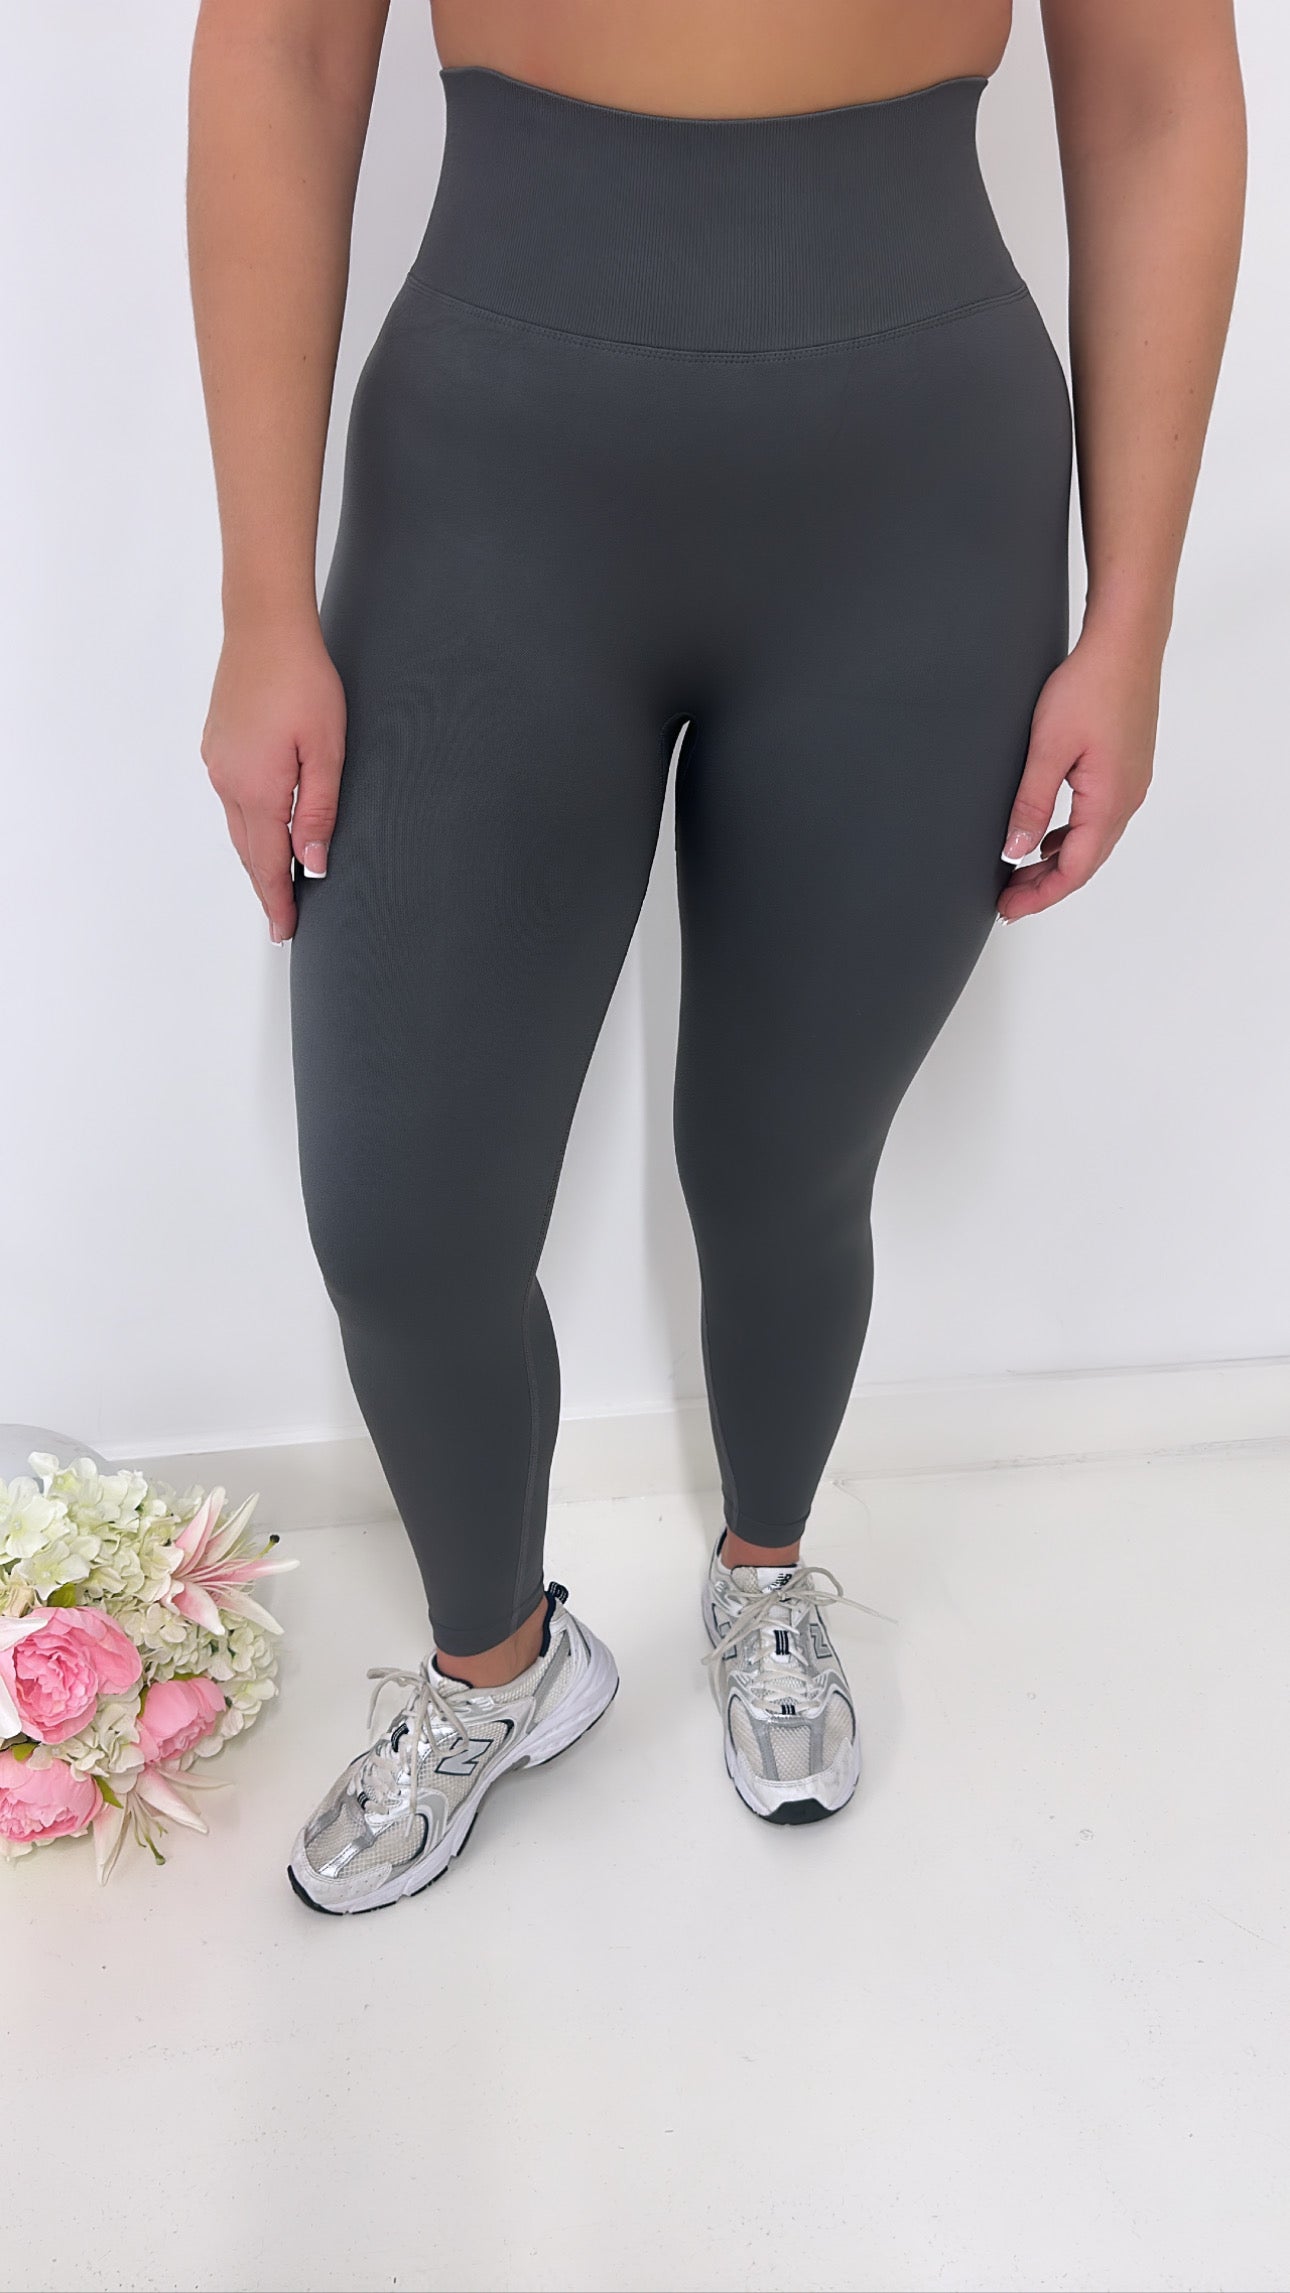 The Nakd Scrunch Collection - Scrunch Bum Gym Leggings In Charcoal